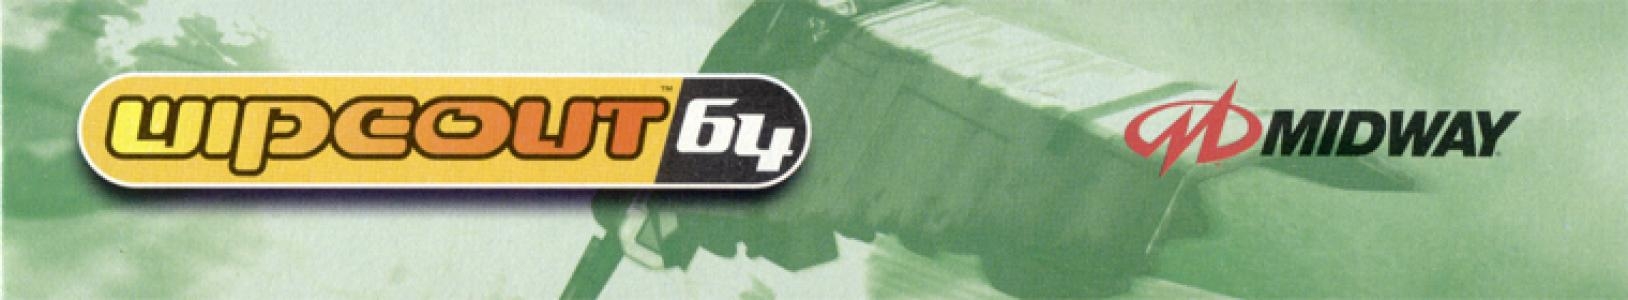 Wipeout 64 banner